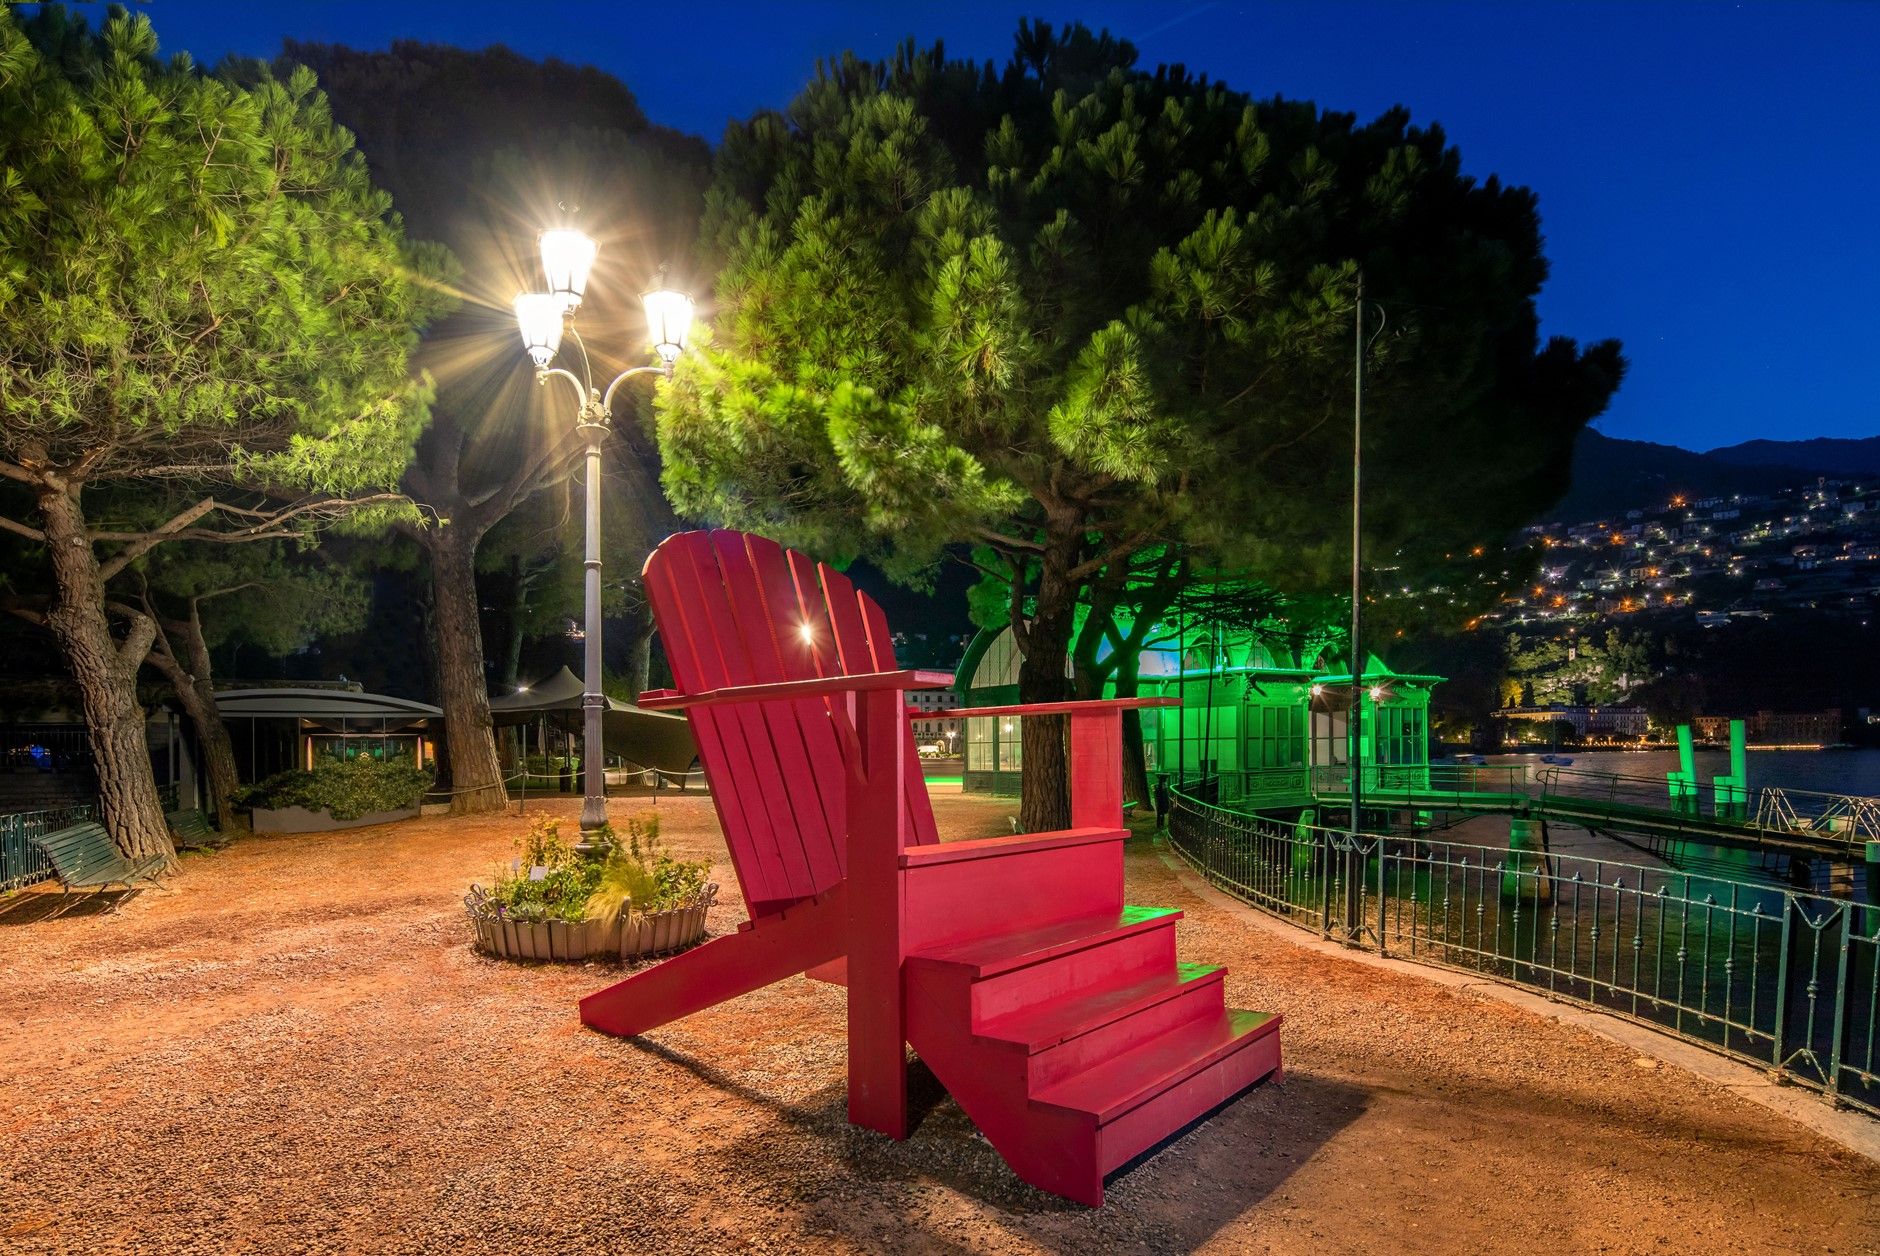 Orticolario’s Delenimentum installation - the gigantic version of the Adirondack Chair created in 1903 by designer Thomas Lee, which will feature in Charterhouse Square during CDW 2022